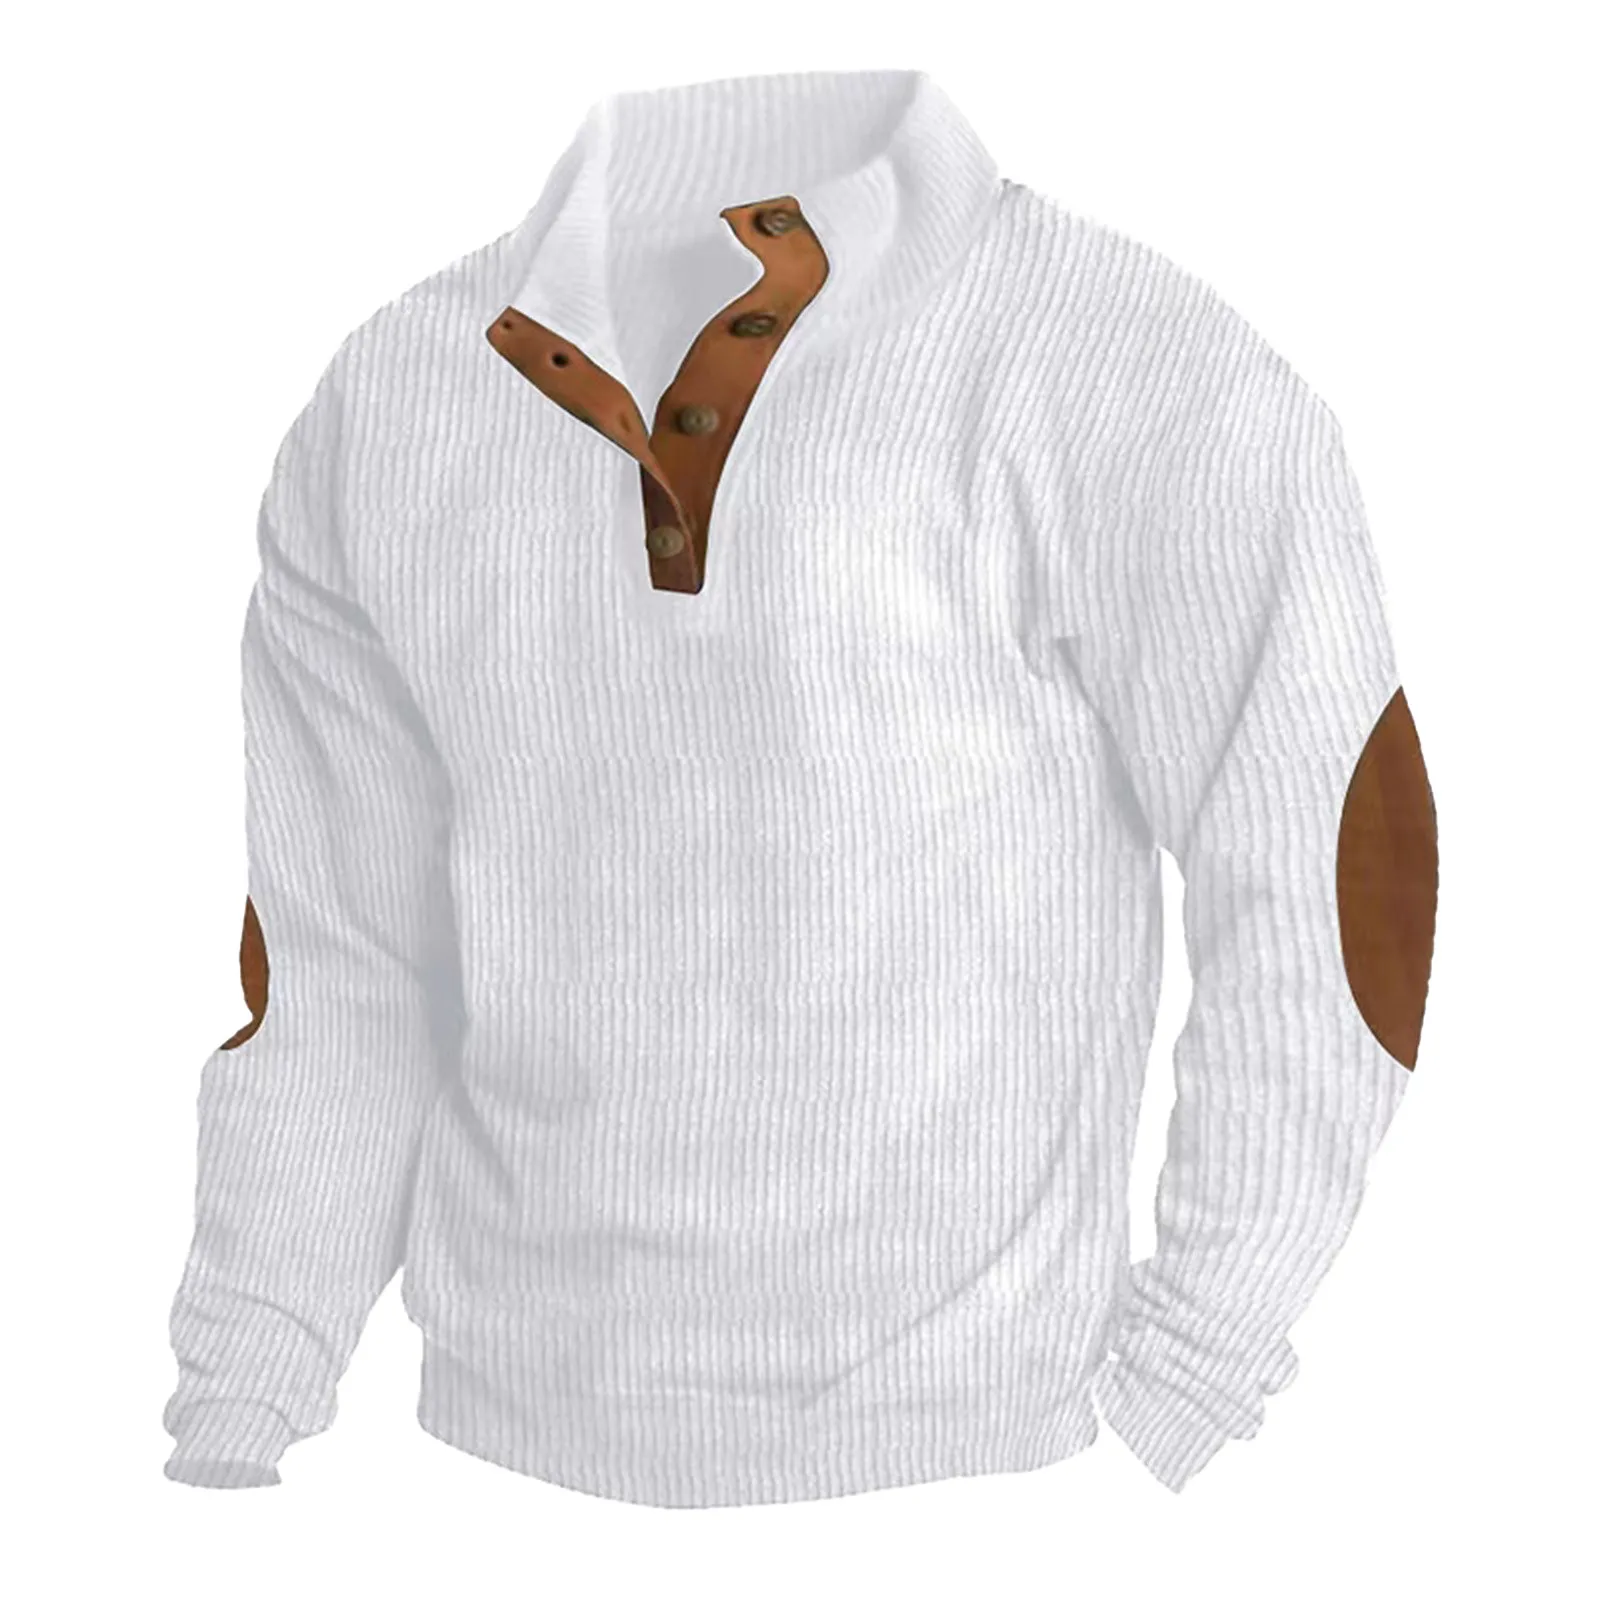 

Men's Autumn And Winter Tops Color-blocked Stand-up Collar Retro Buttons Casual Striped Relaxed Comfortable Sweatshirt